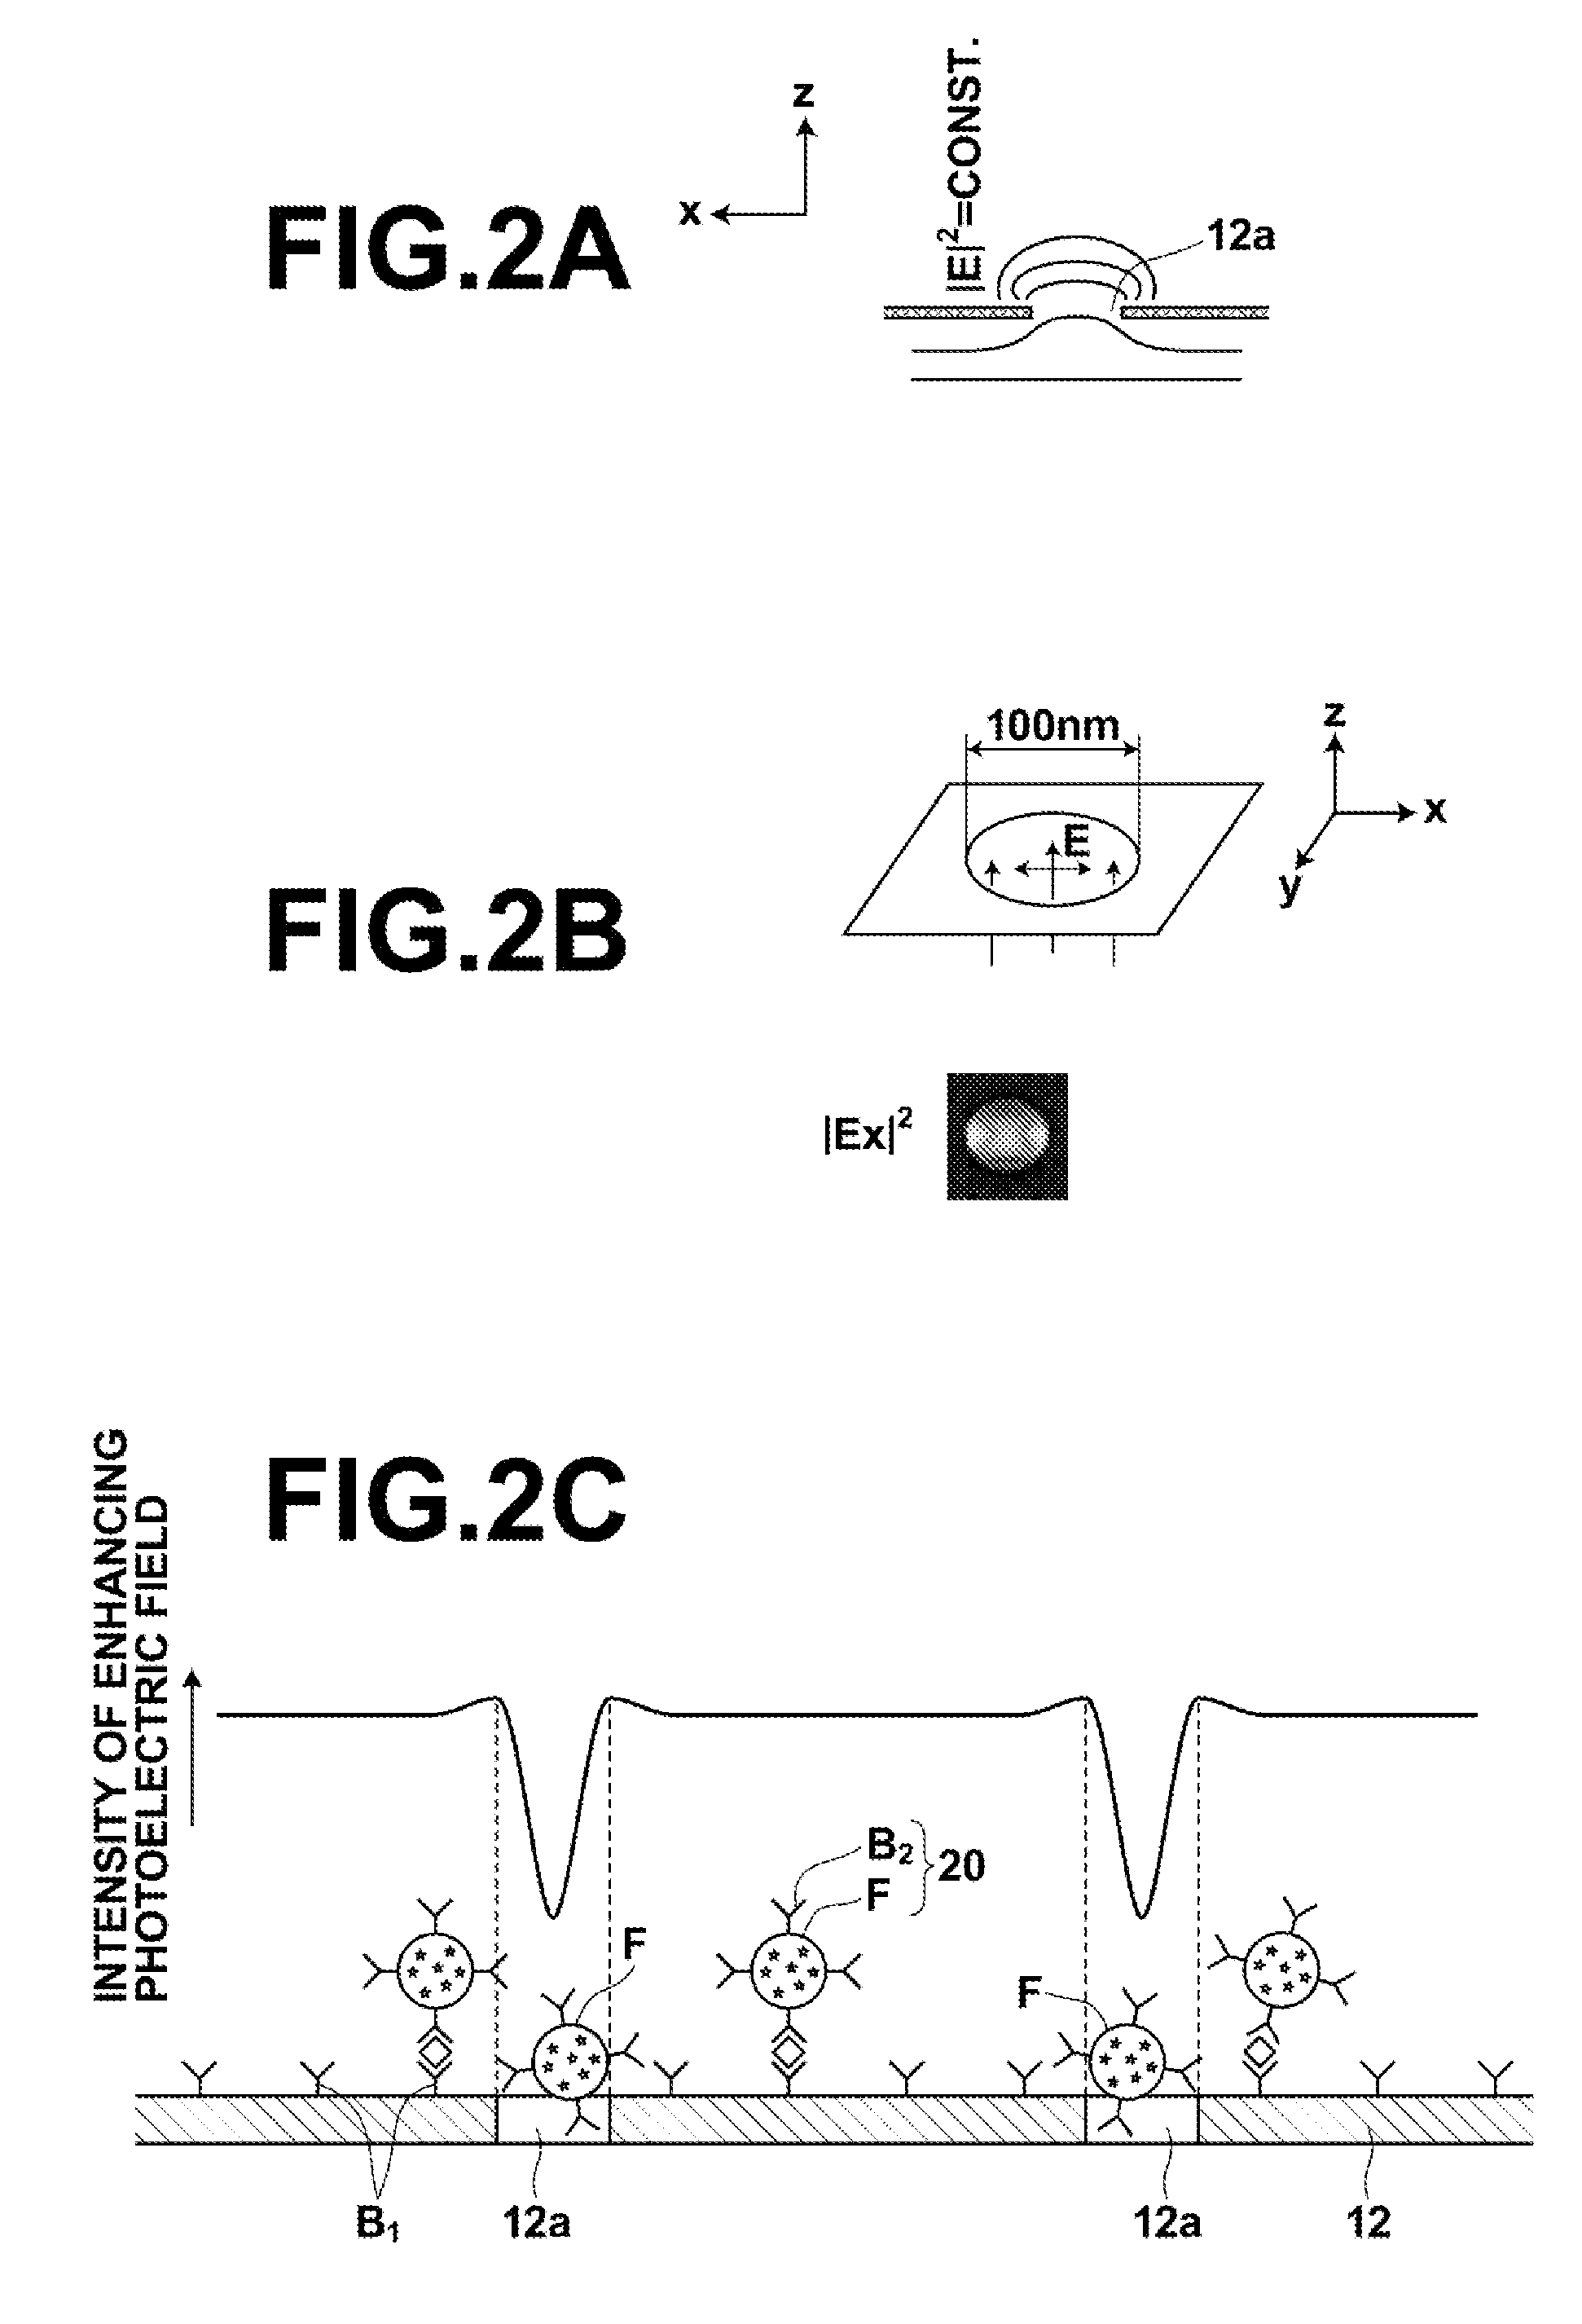 Fluorescence detecting apparatus, sample cell for detecting fluorescence, and fluorescence detecting method